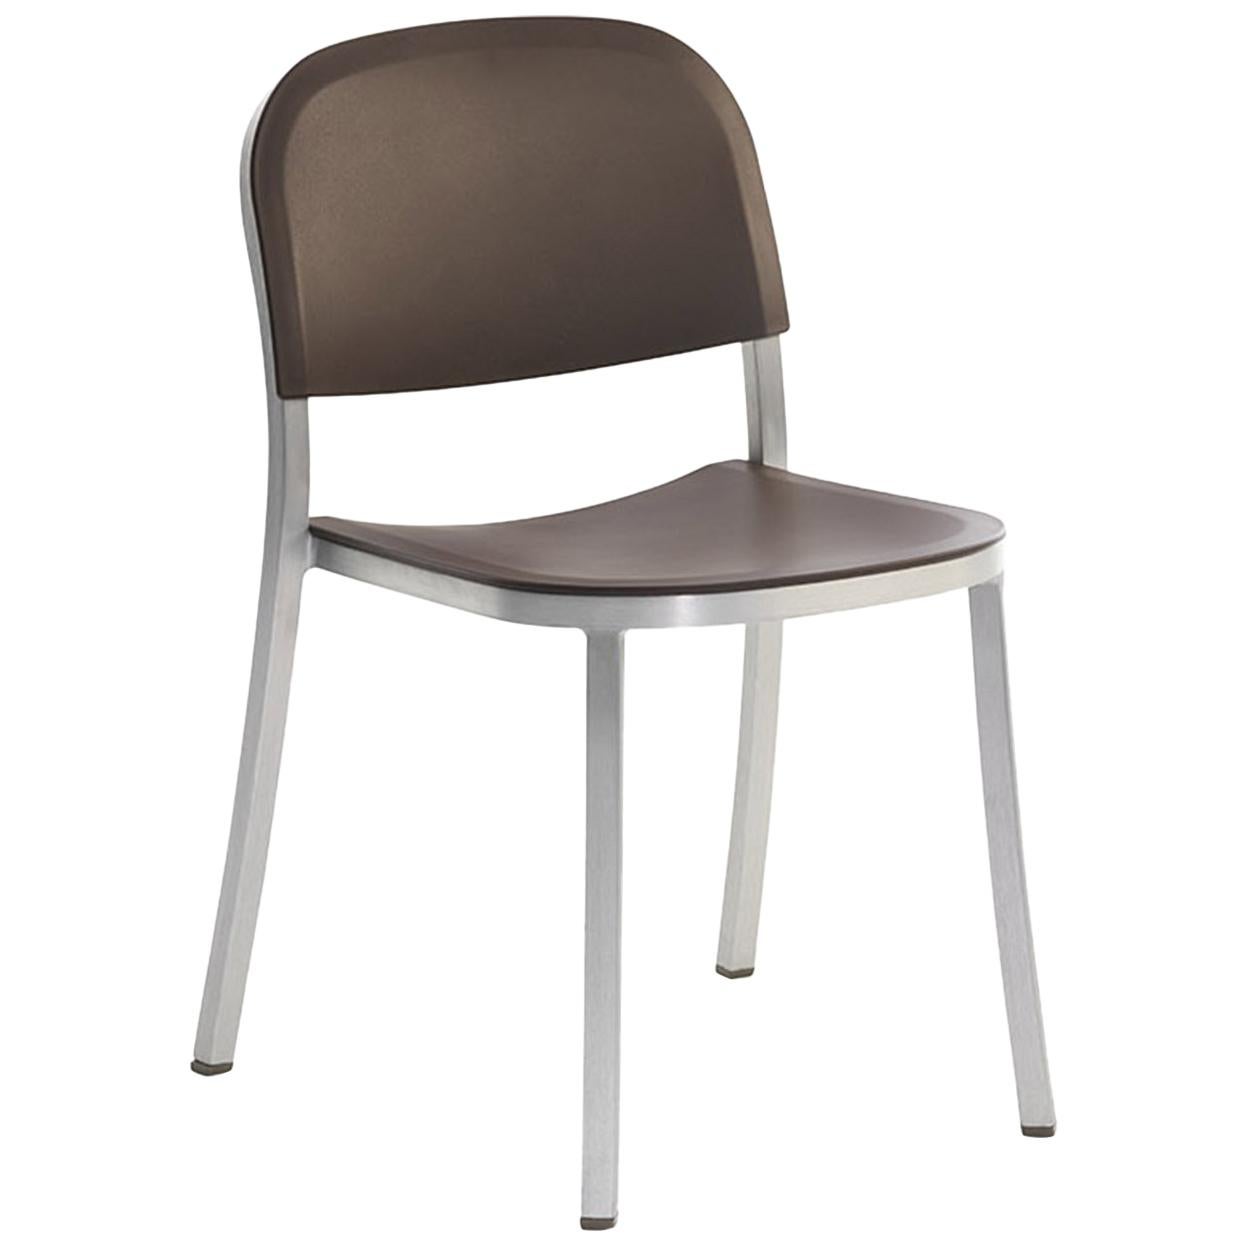 Emeco 1 Inch Stacking Chair in Brushed Aluminum and Brown by Jasper Morrison